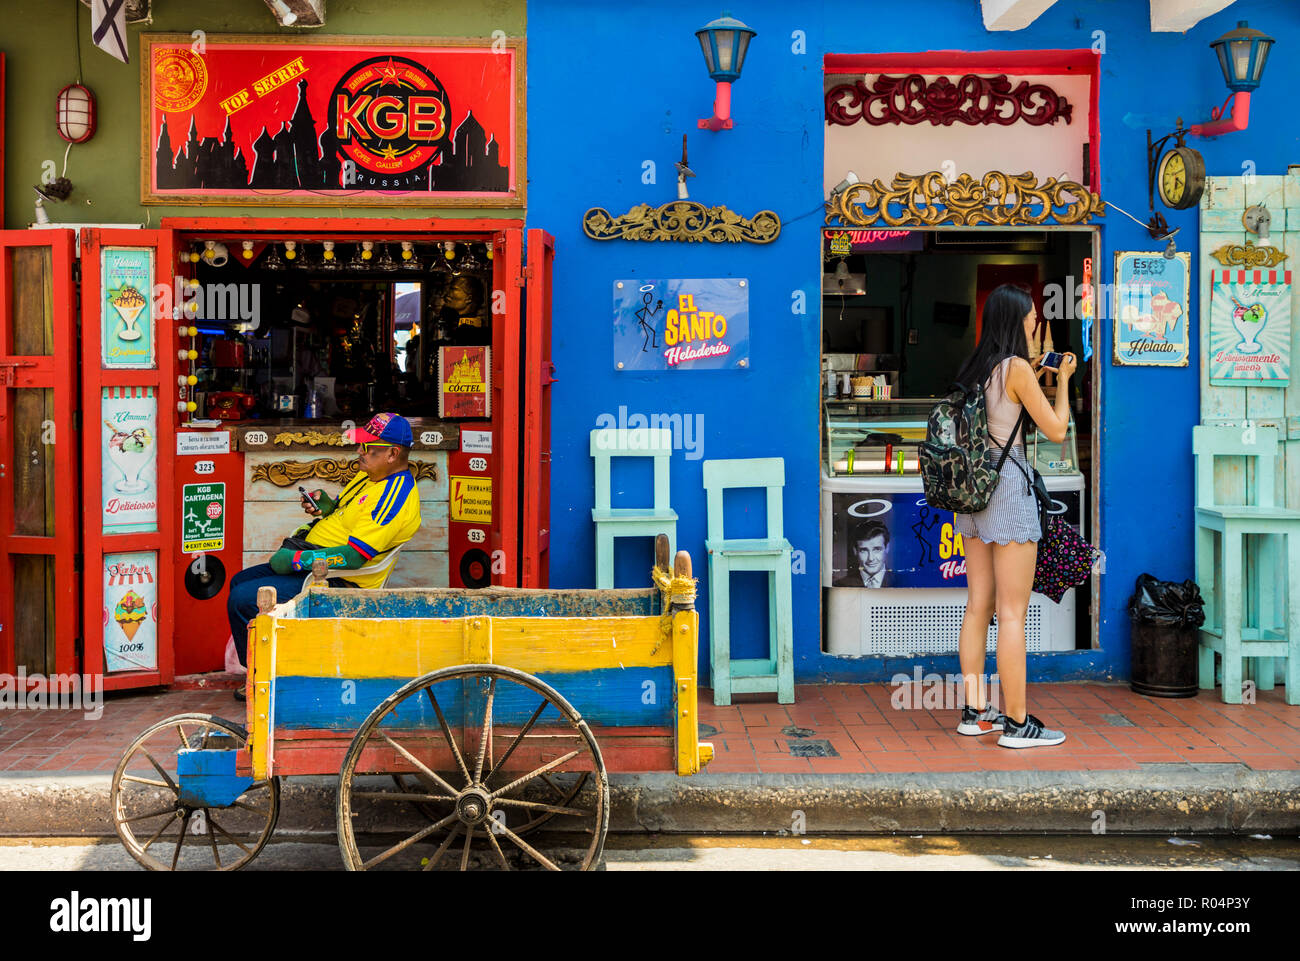 A colourful street scene in the old town, Cartagena de Indias, Colombia, South America Stock Photo